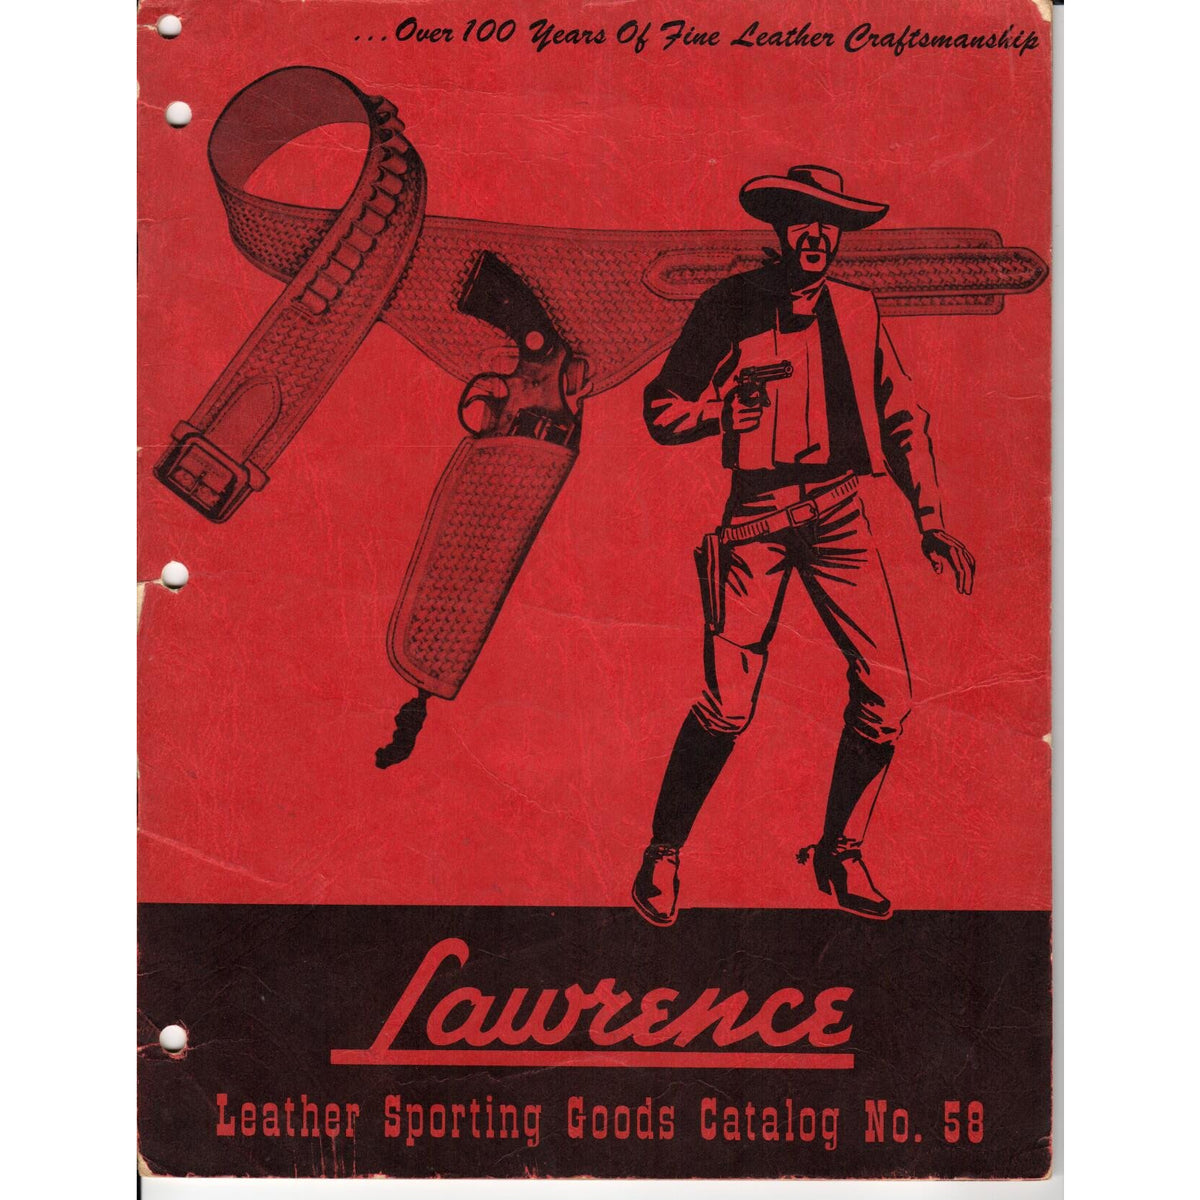 Lawrence Leather Sporting Goods Catalog No. 58